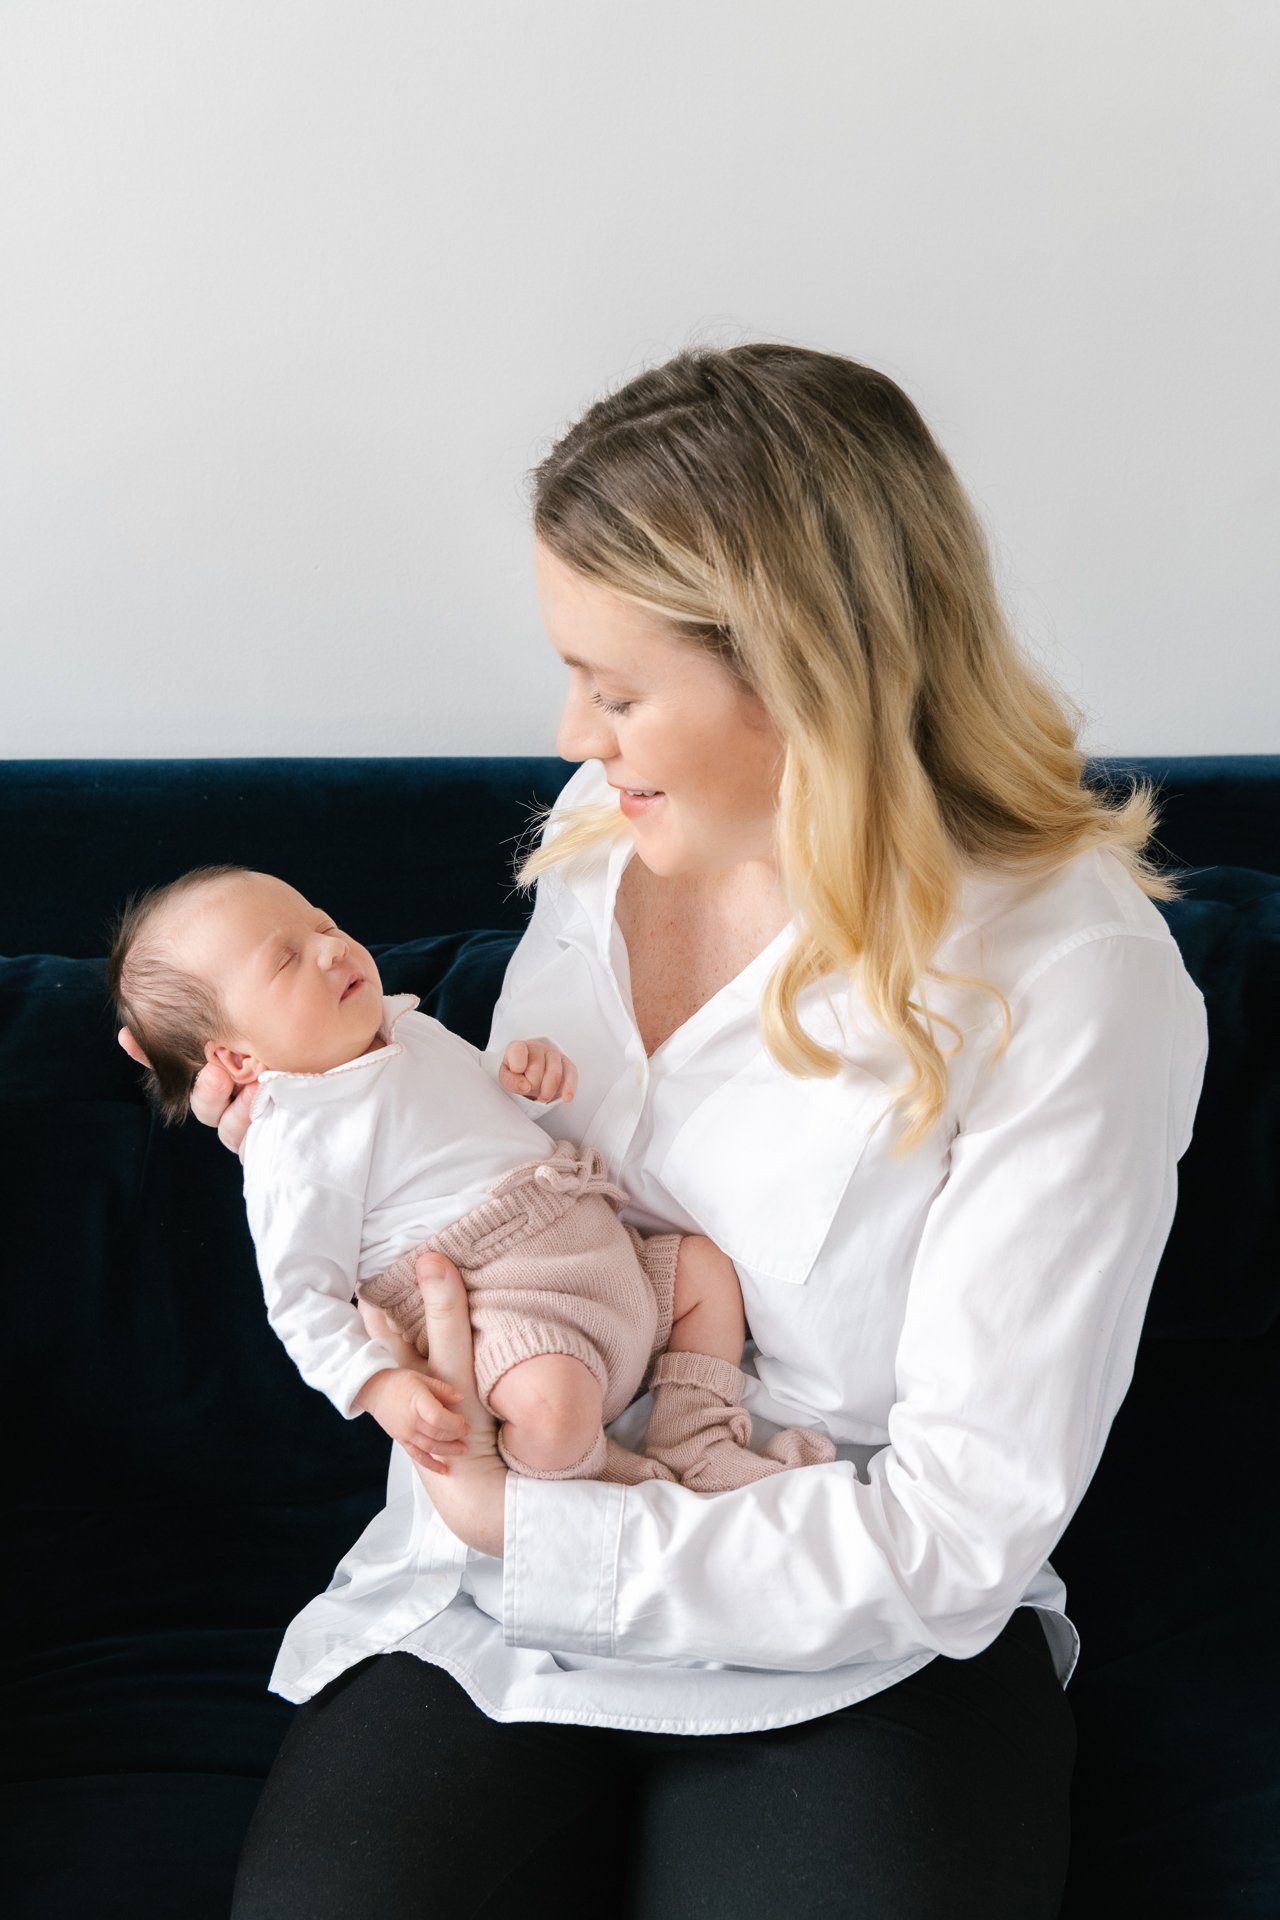  Nicole Hawkins photography will have the studio stocked with diapers, wipes, outfits, blankets, and props if wanted. For clients using the studio wardrobe, everything will be cleaned and steamed prior to the session. #twinnewbornsessions #NicoleHawk